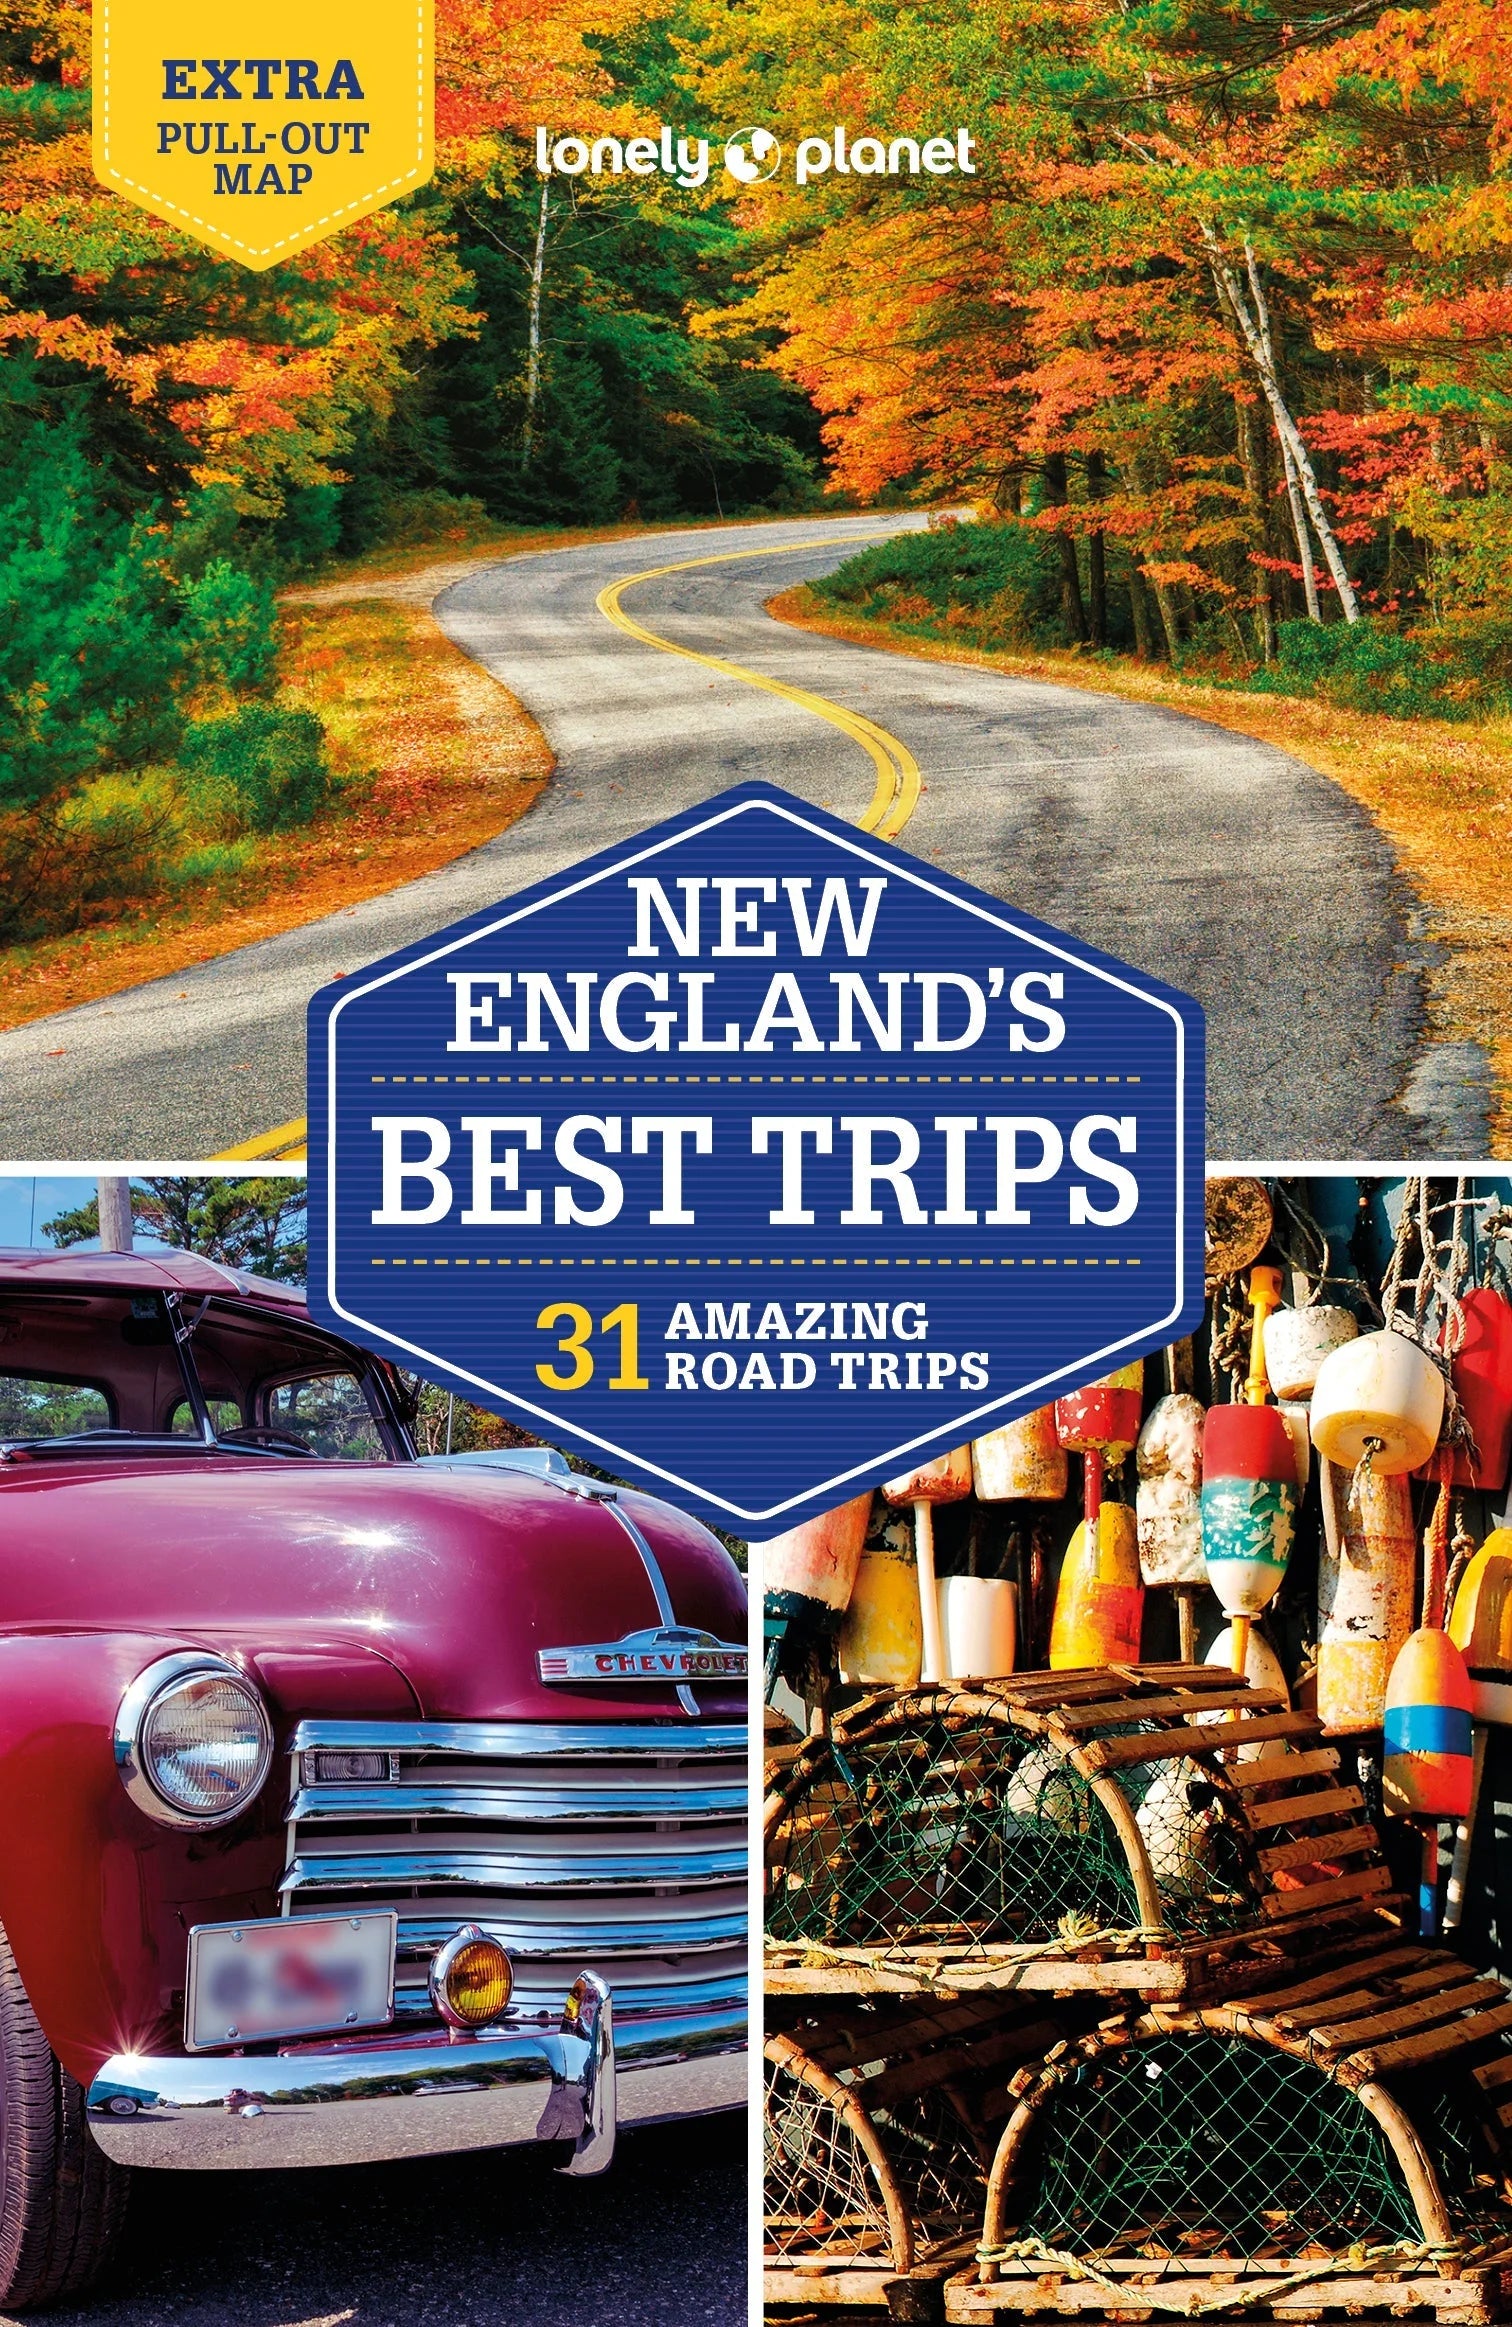 New England's Best Trips - Lonely Planet